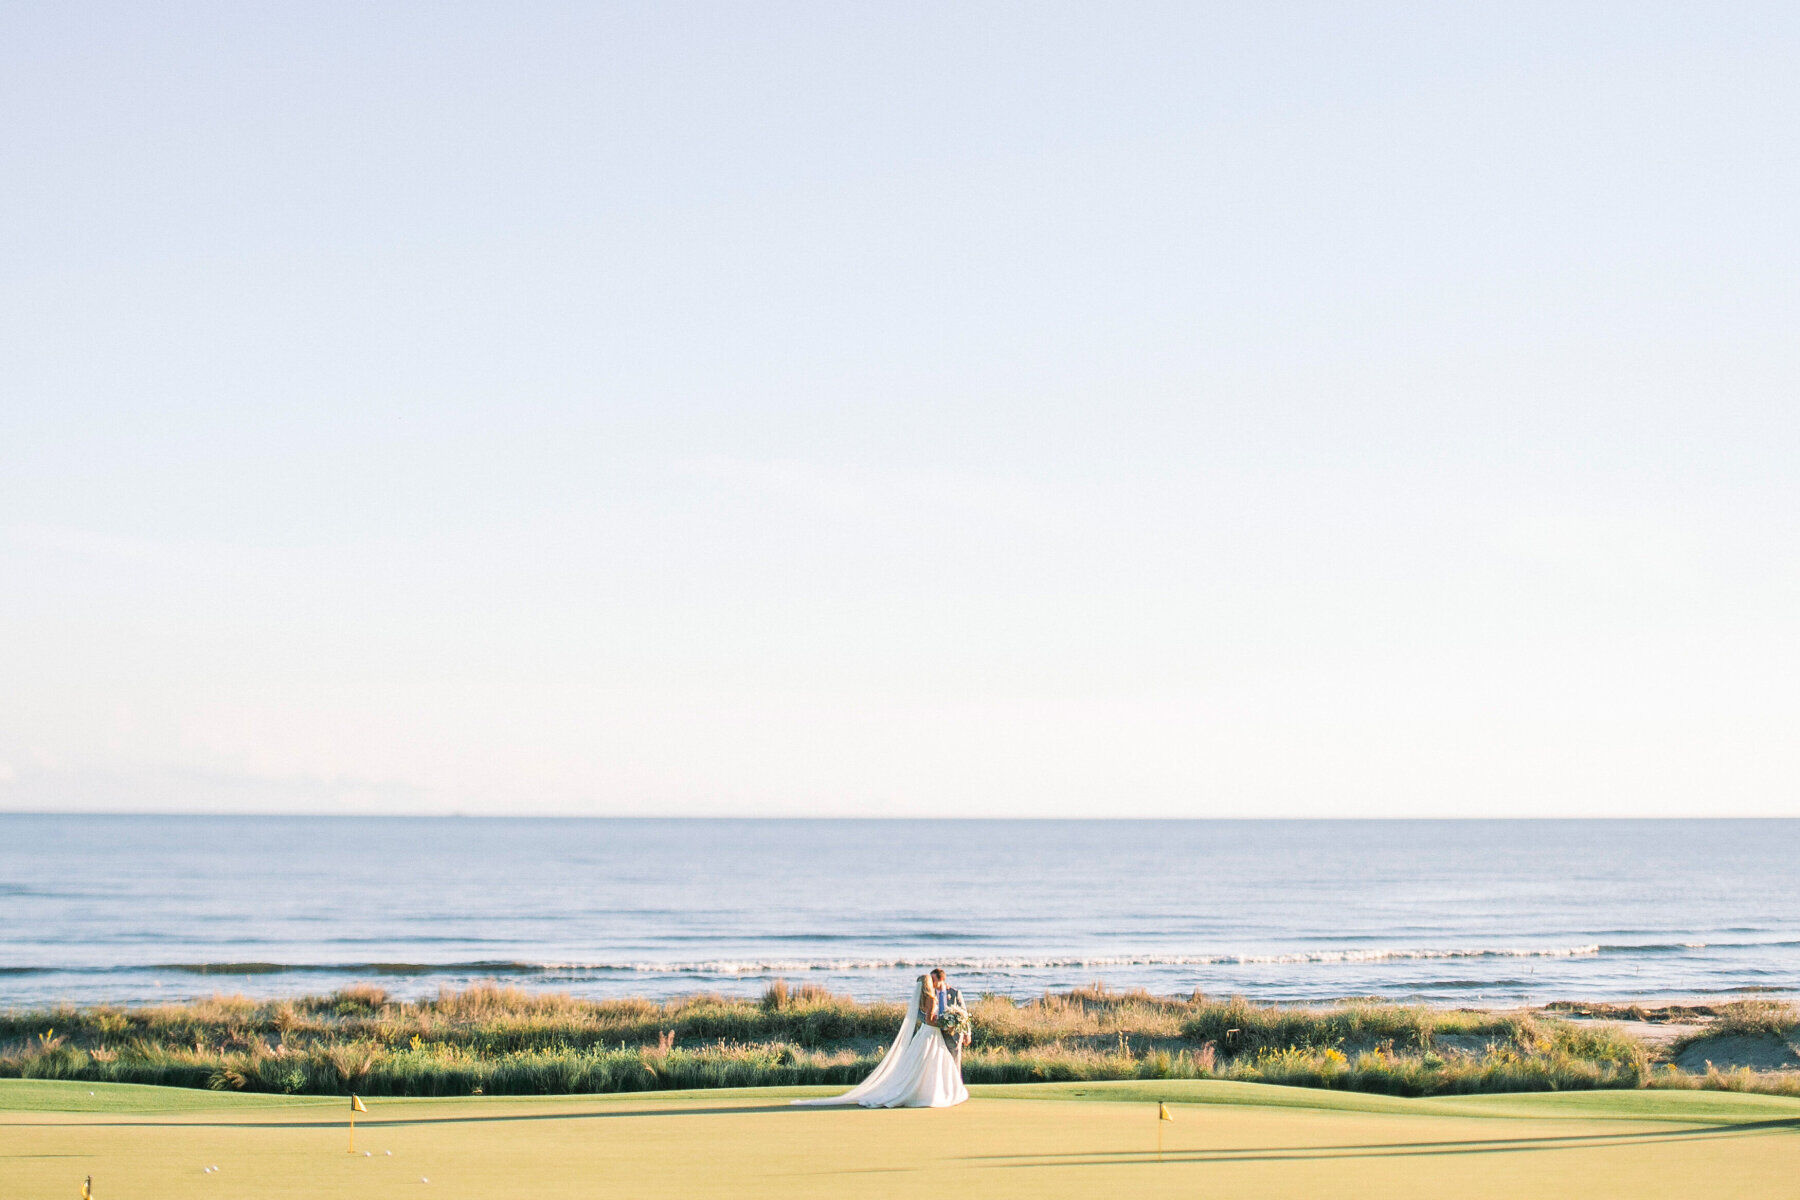 Golf Course Wedding Venues: A wedding couple on an oceanfront golf course in Kiawah Island, South Carolina.